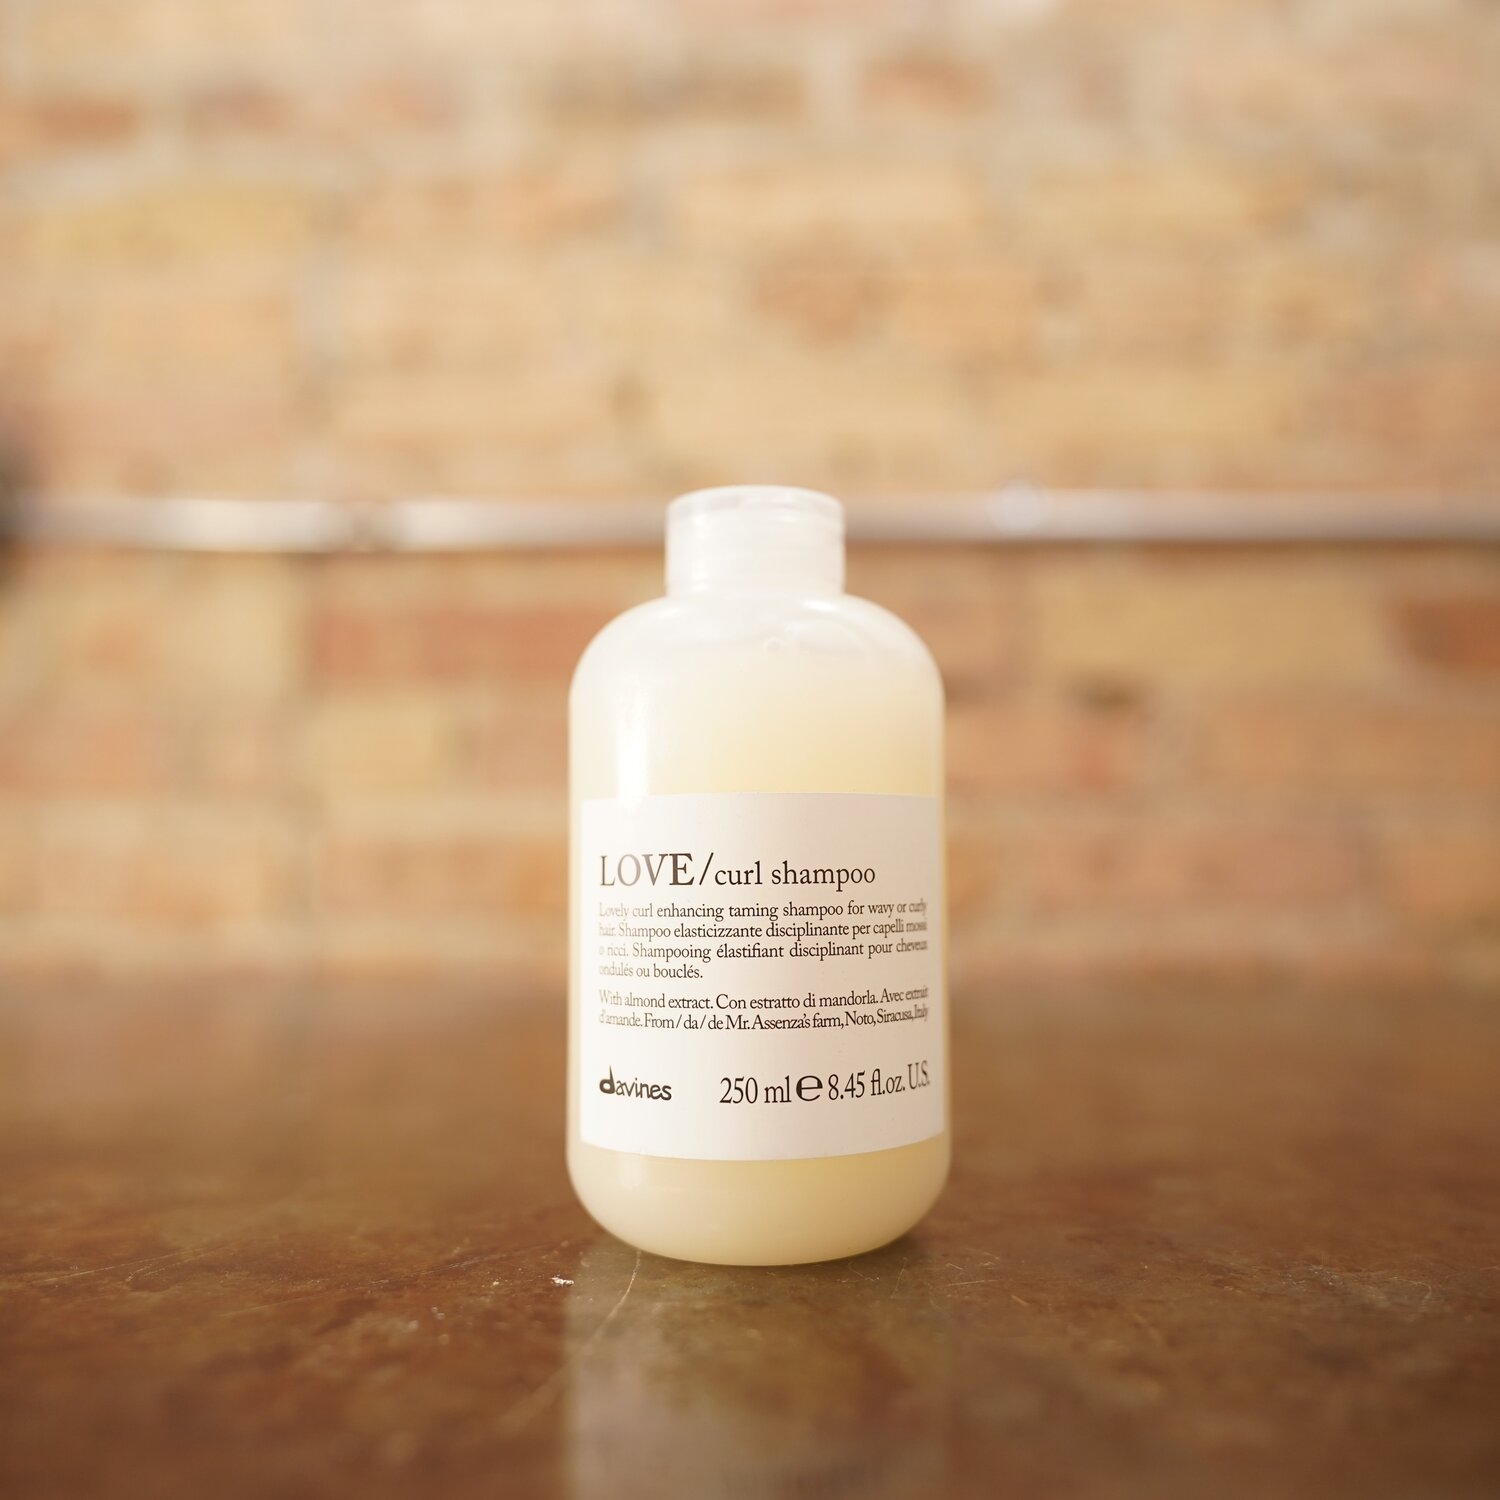 Davines Shampoo withlove collective